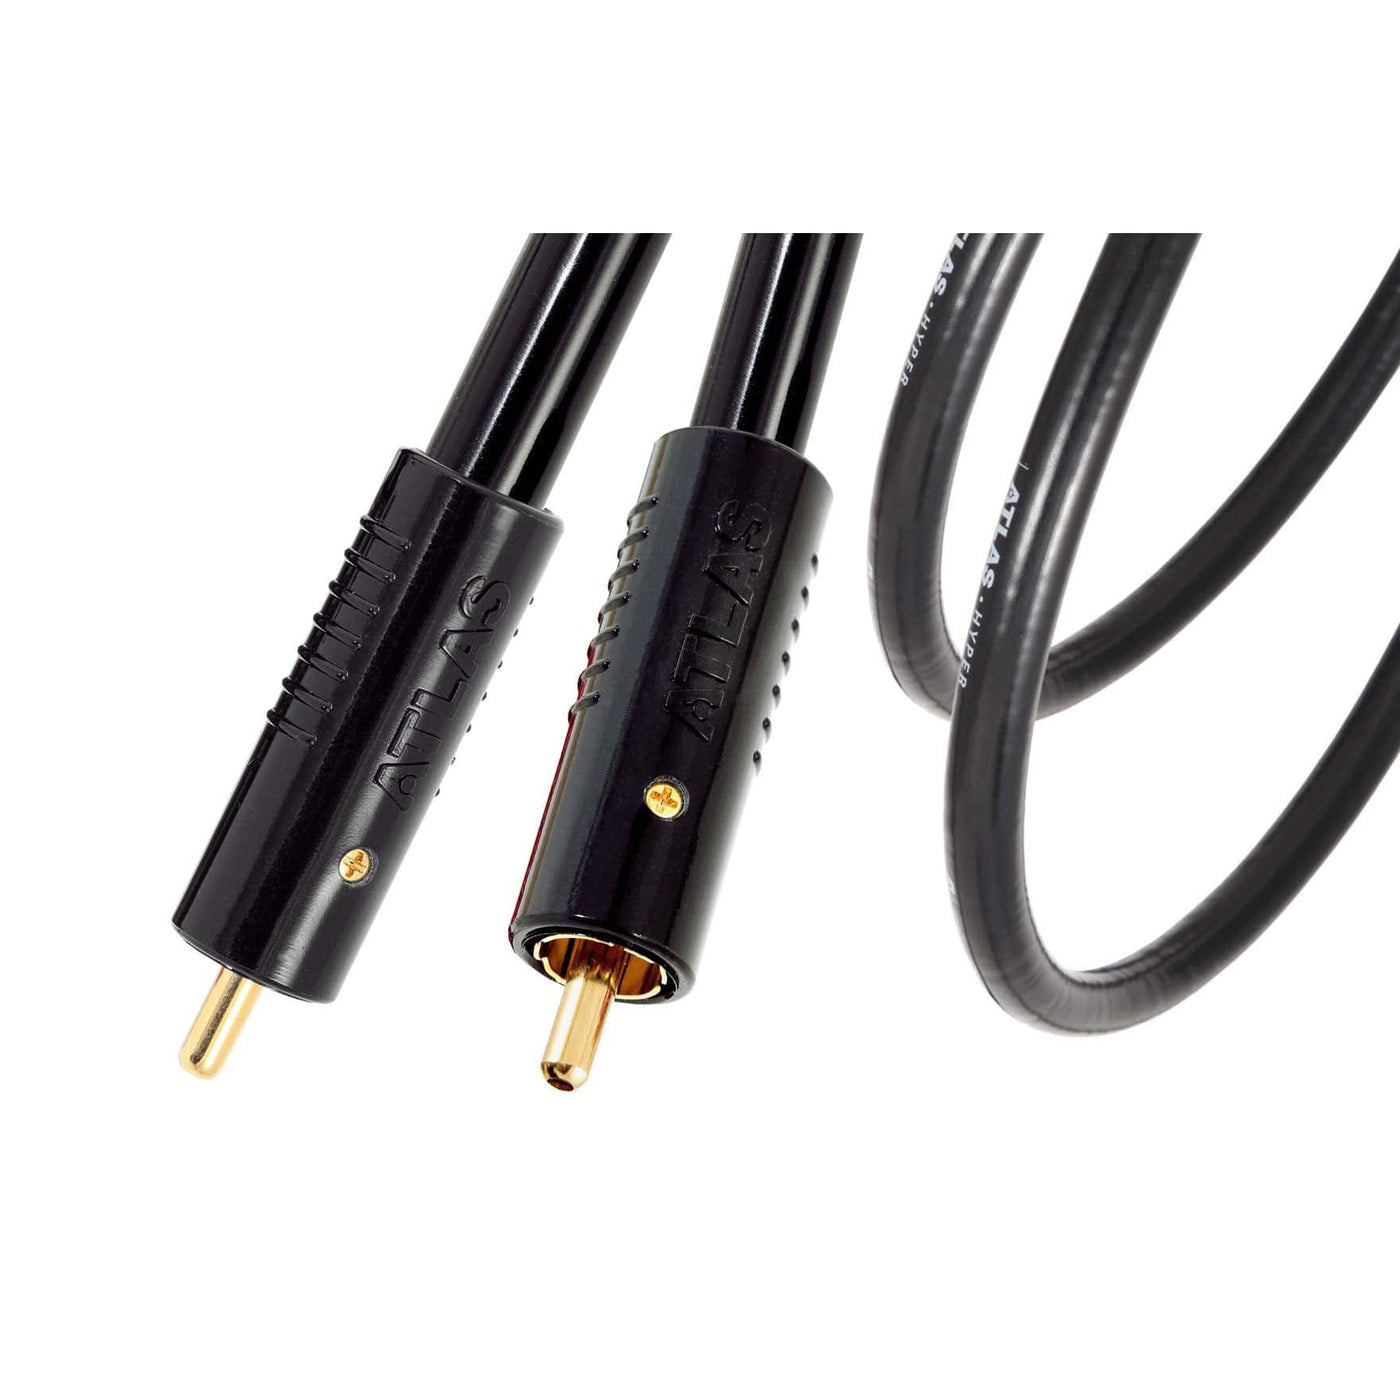 Atlas Hyper Achromatic Subwoofer RCA Cable at Audio Influence